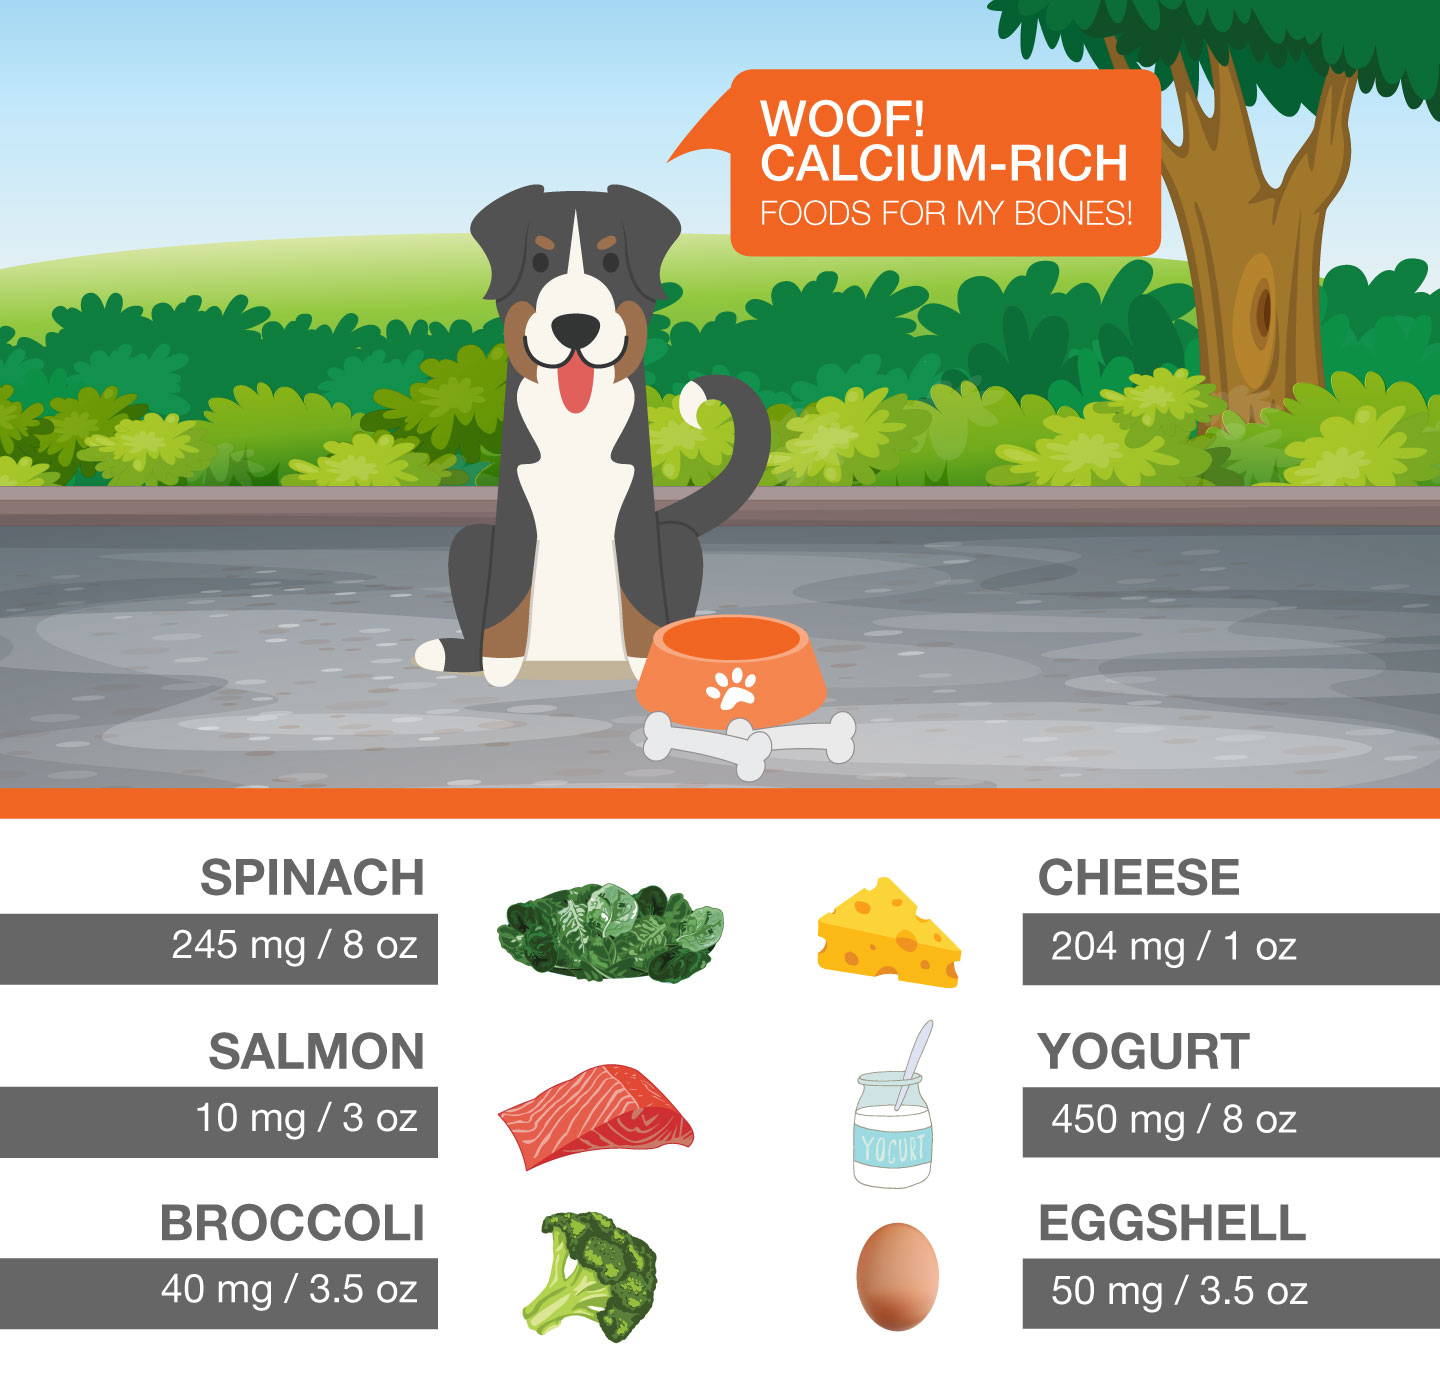 Can Dog Food Cause High Calcium Levels?